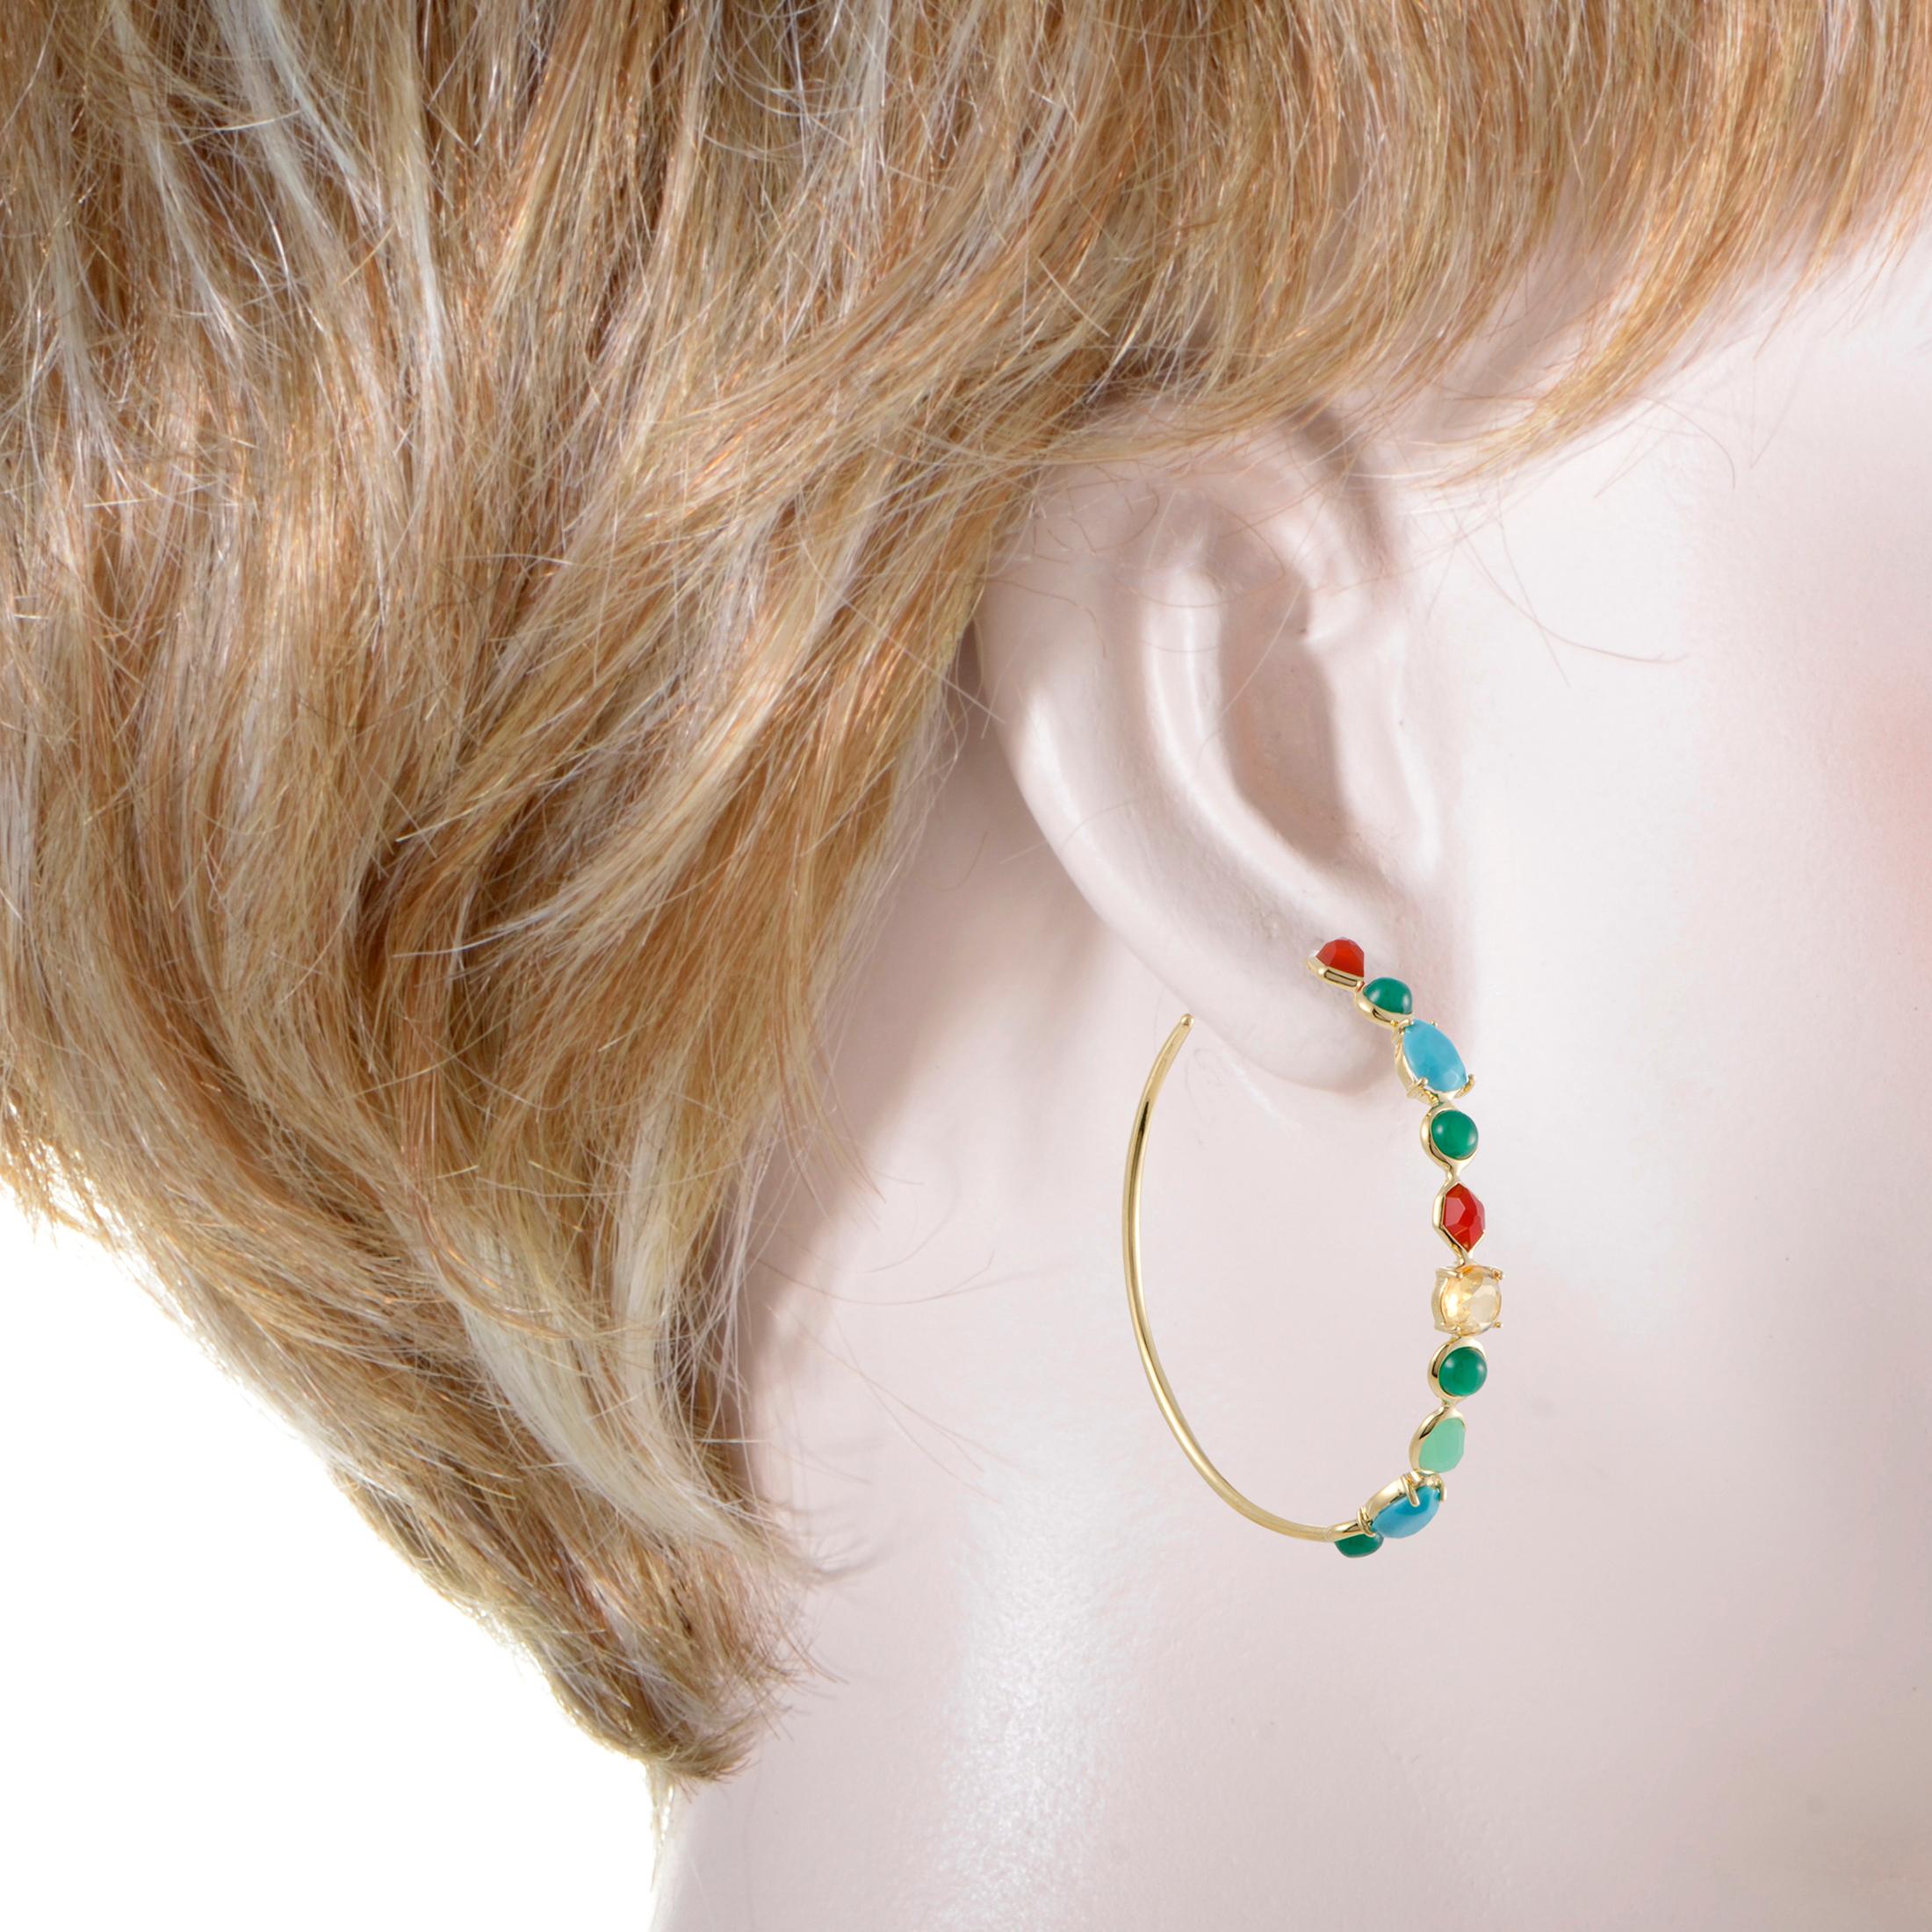 Both whimsical and elegant thanks to the ingenious combination of alluring 18K yellow gold and diversely cut colorful gems, these hoop earrings offer tasteful eye-catching appearance. The pair is designed by Ippolita for the spectacular “Rock Candy”